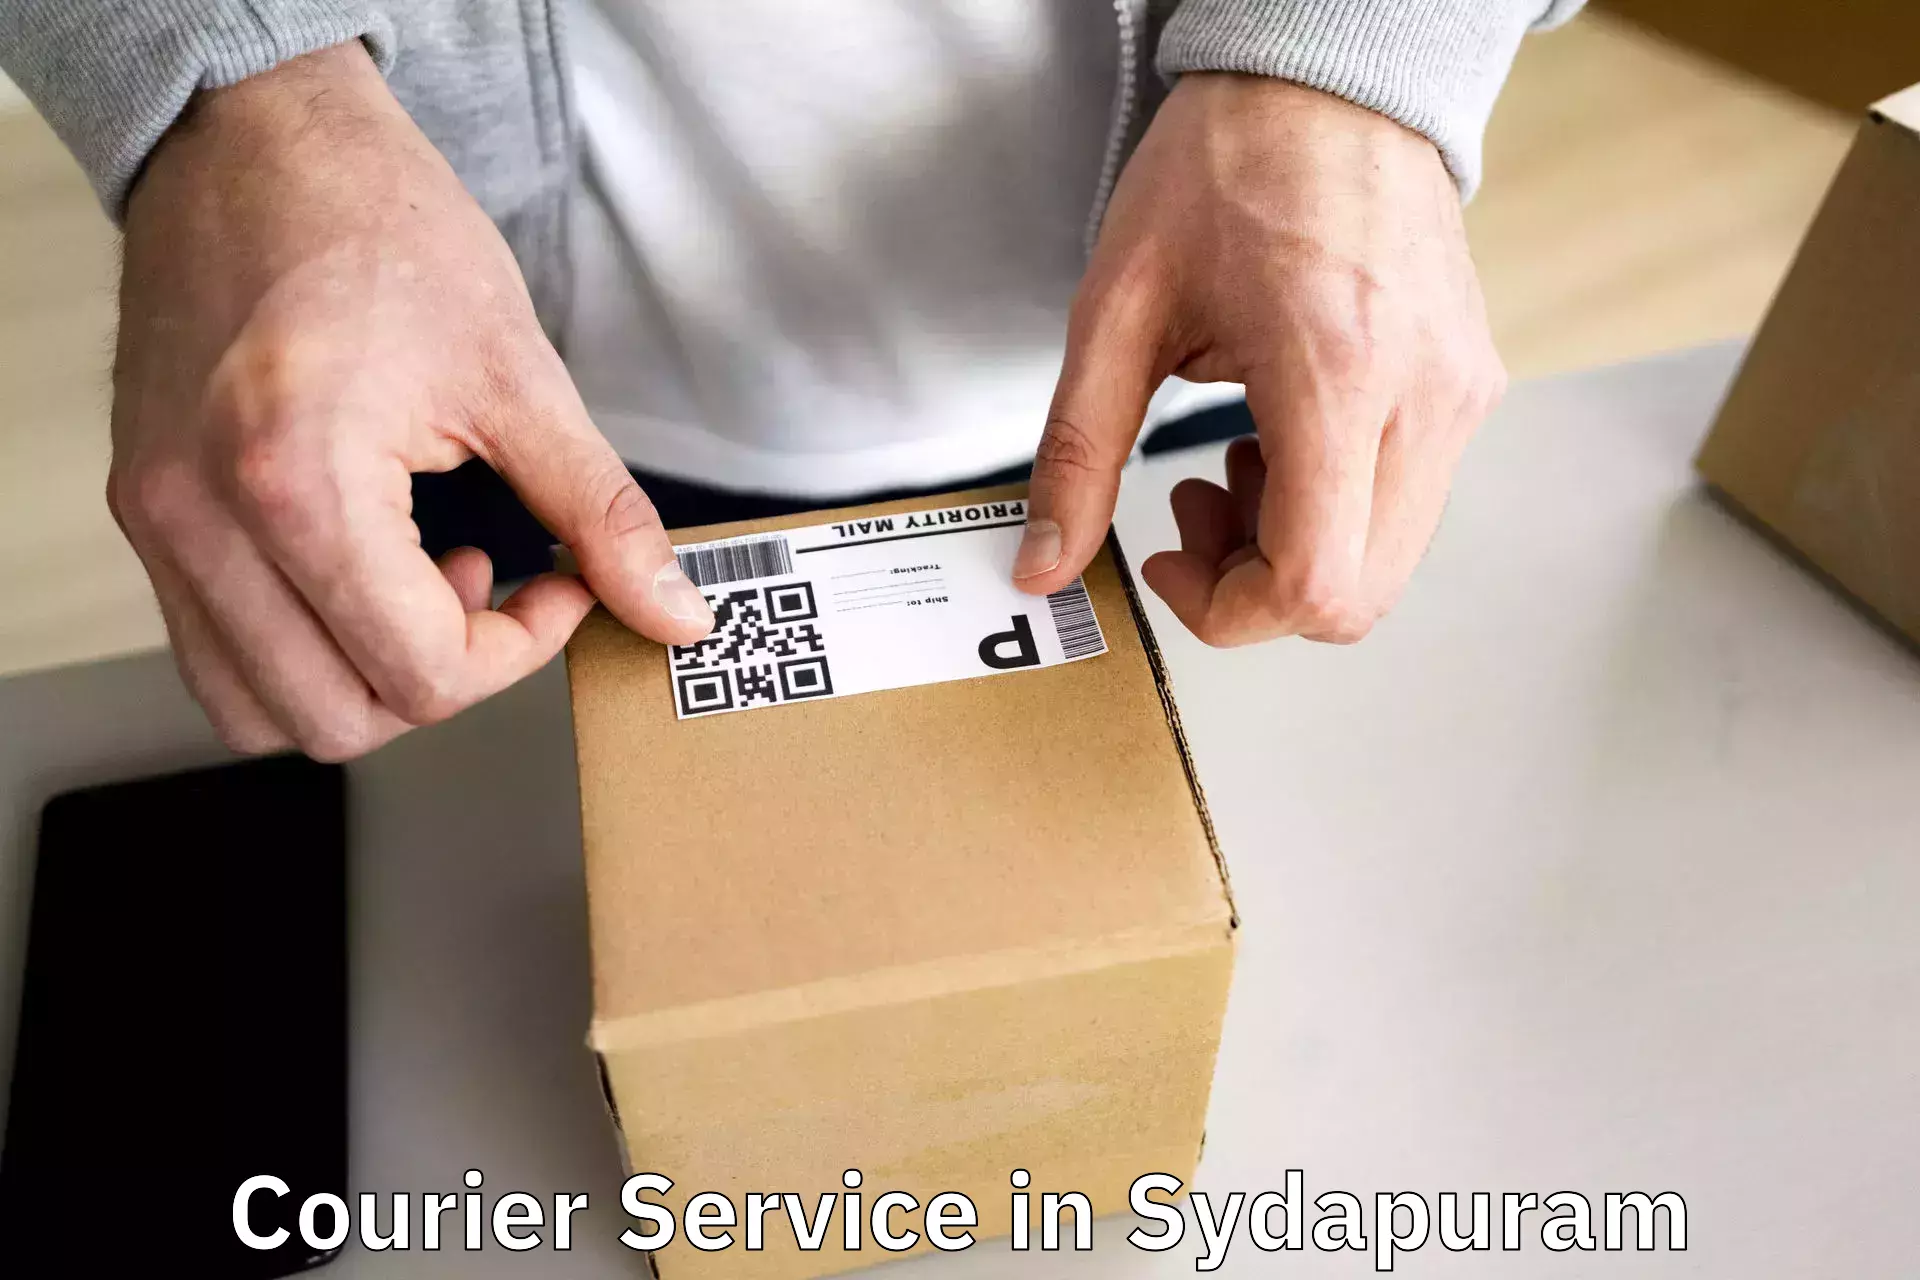 Fast-track shipping solutions in Sydapuram